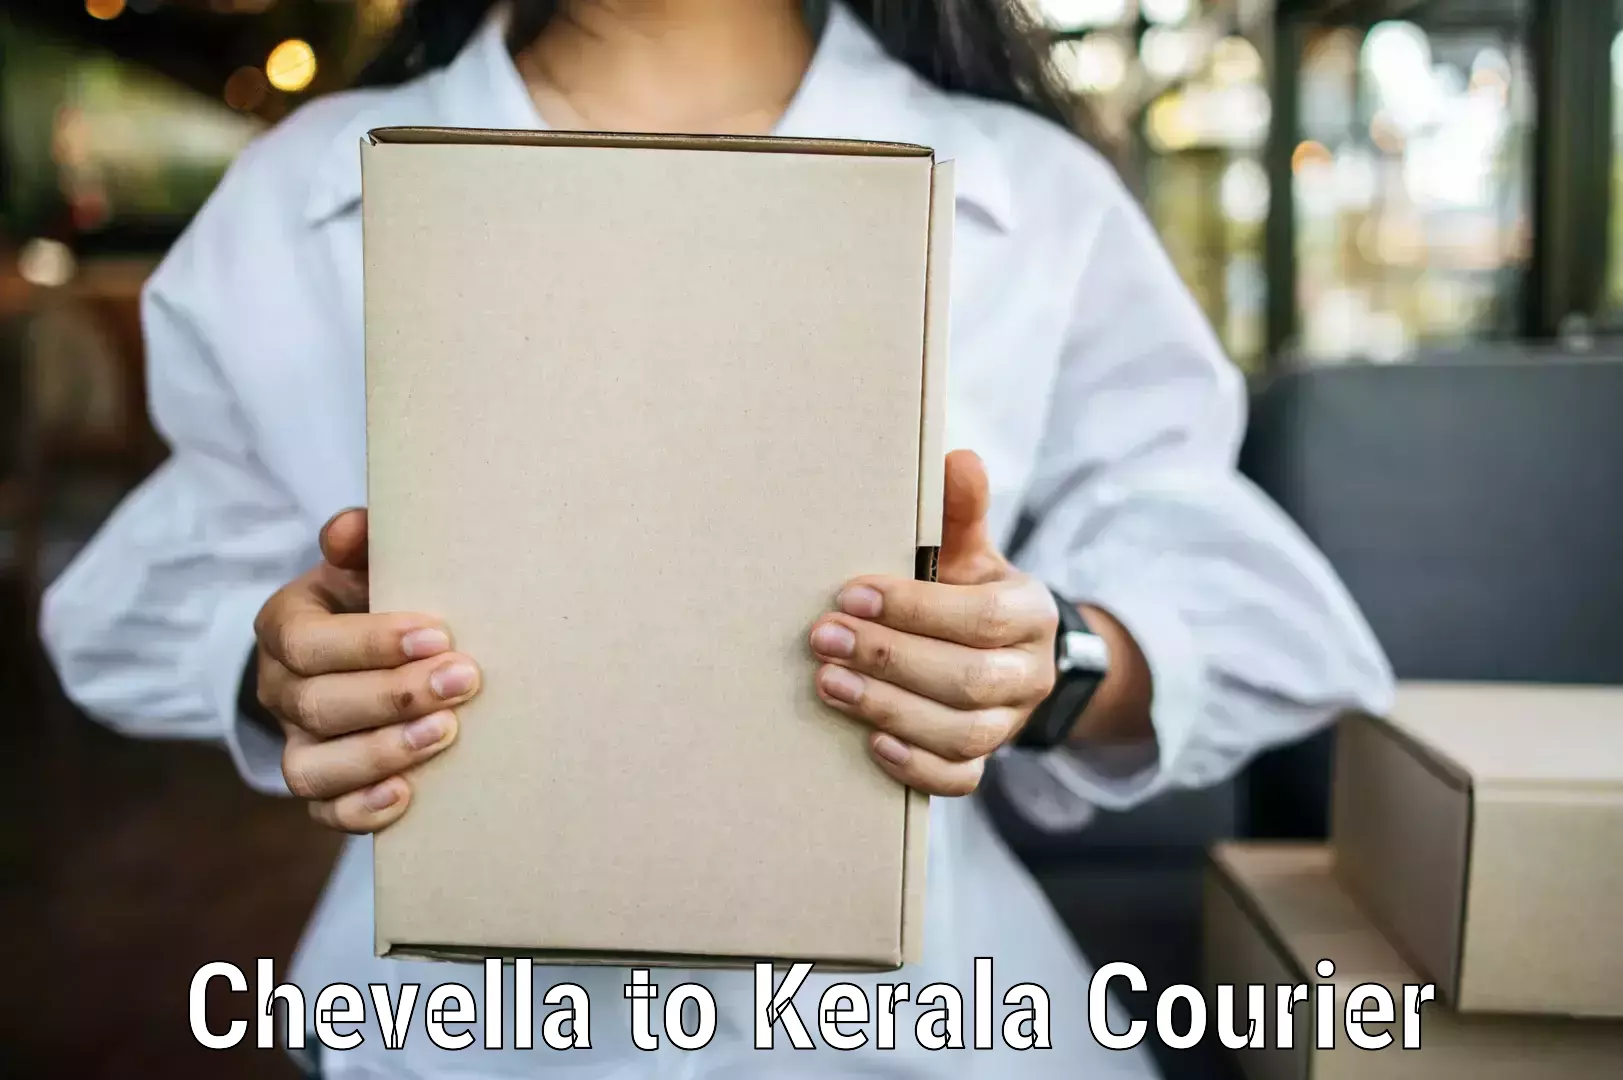 Modern courier technology in Chevella to Chervathur